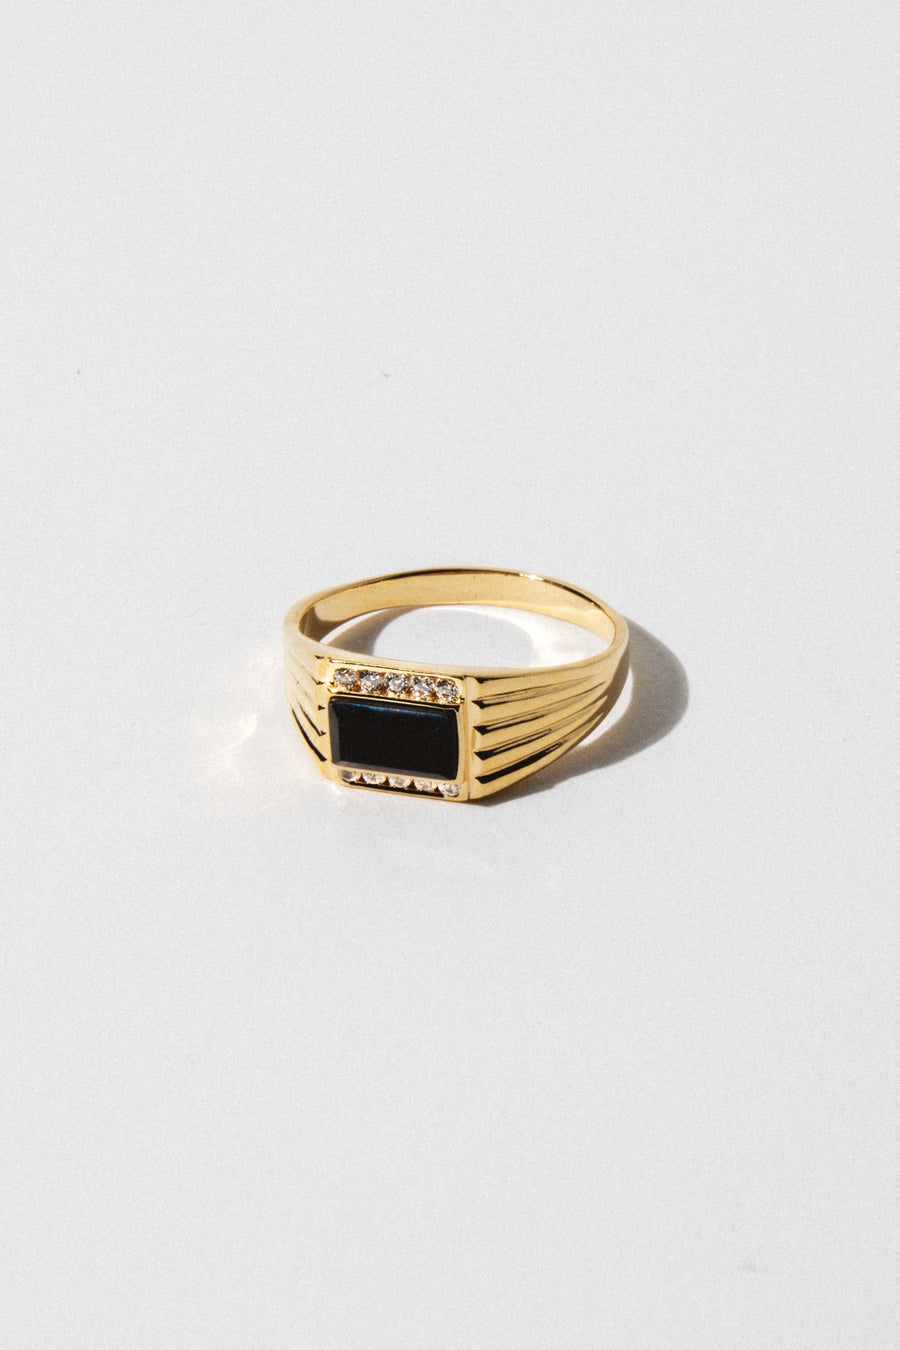 Sparrow Jewelry US 7 / Gold Levi Onyx Ring